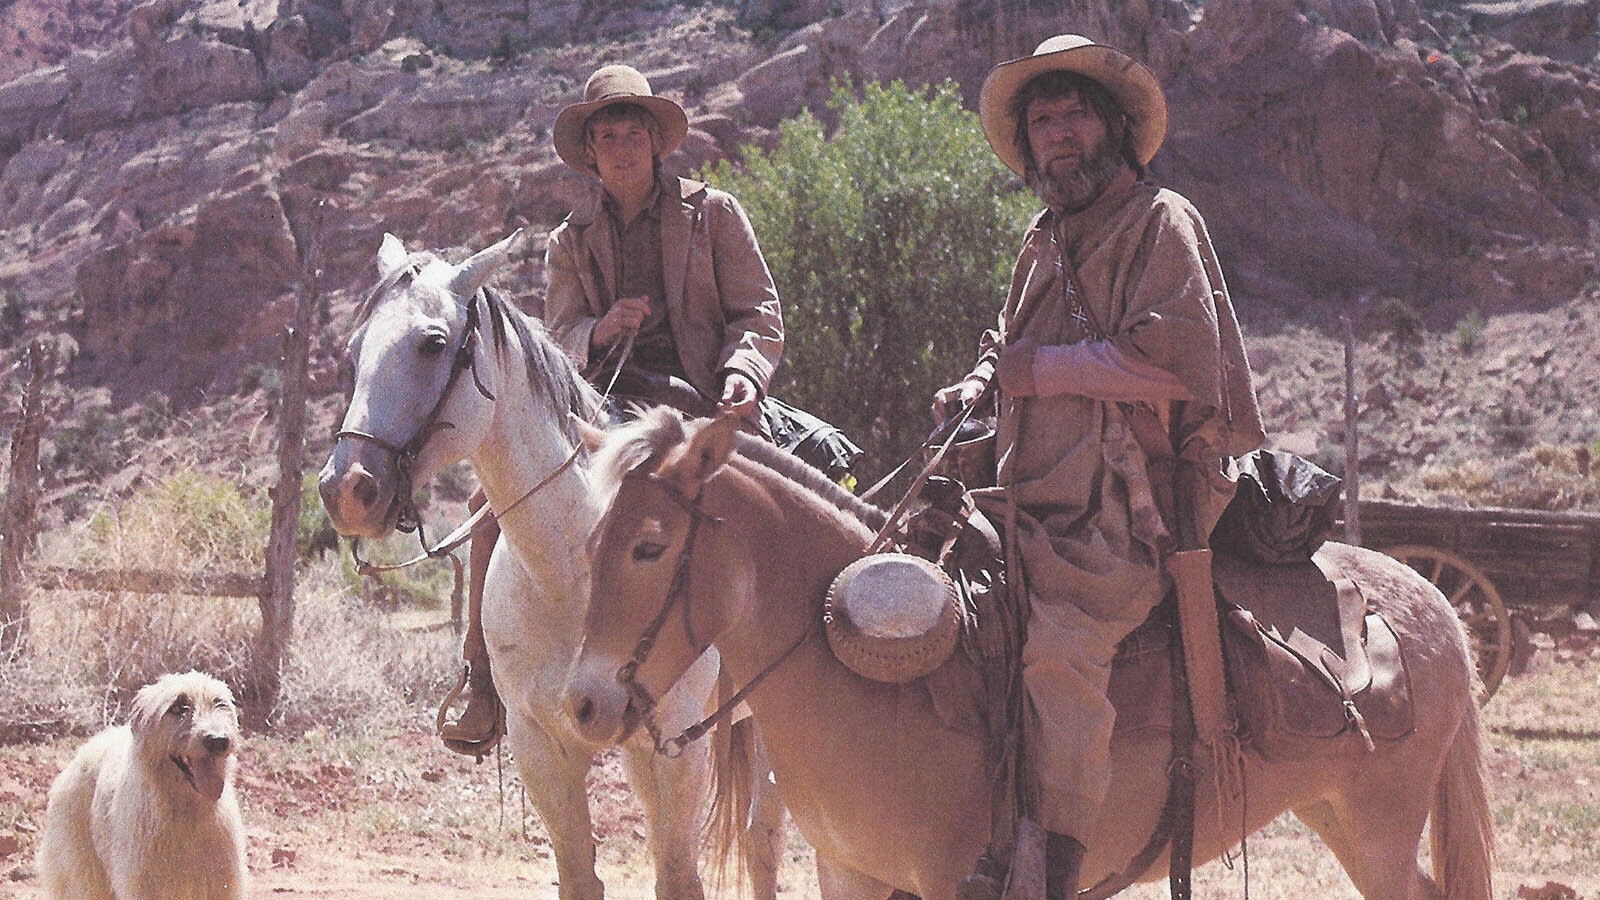 Stewart Petersen in a scene from the movie “Against a Crooked Sky" with Richard Boone.